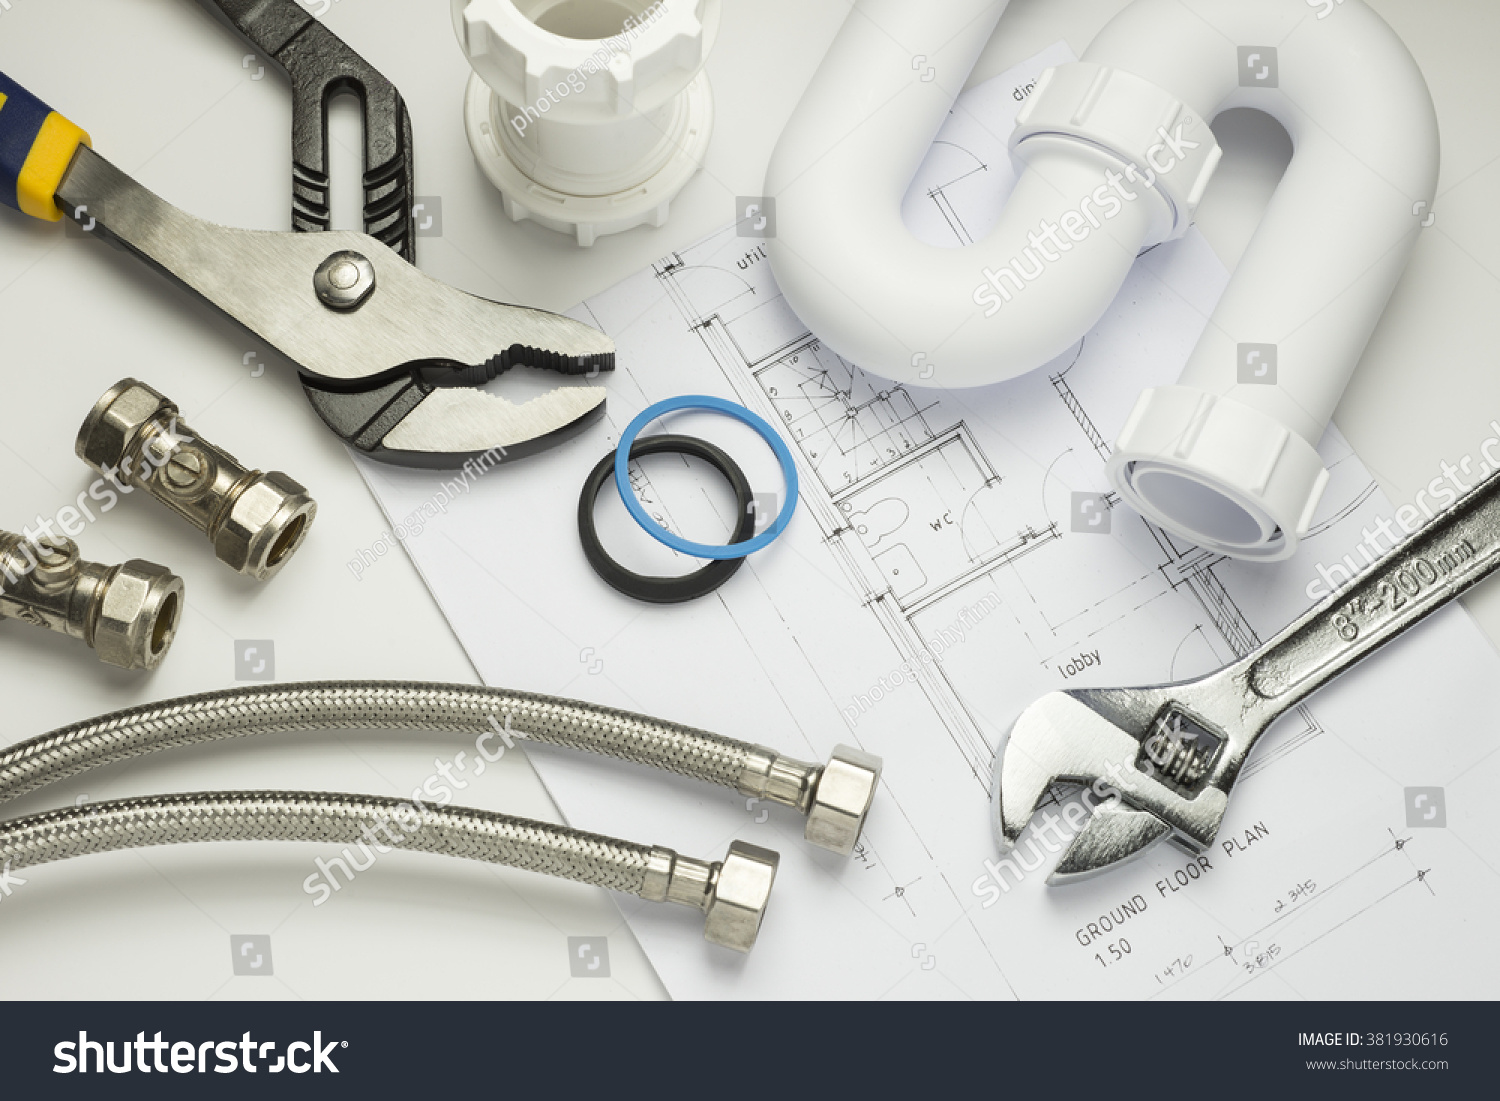 A selection of plumbing tools and fittings on house plans #381930616